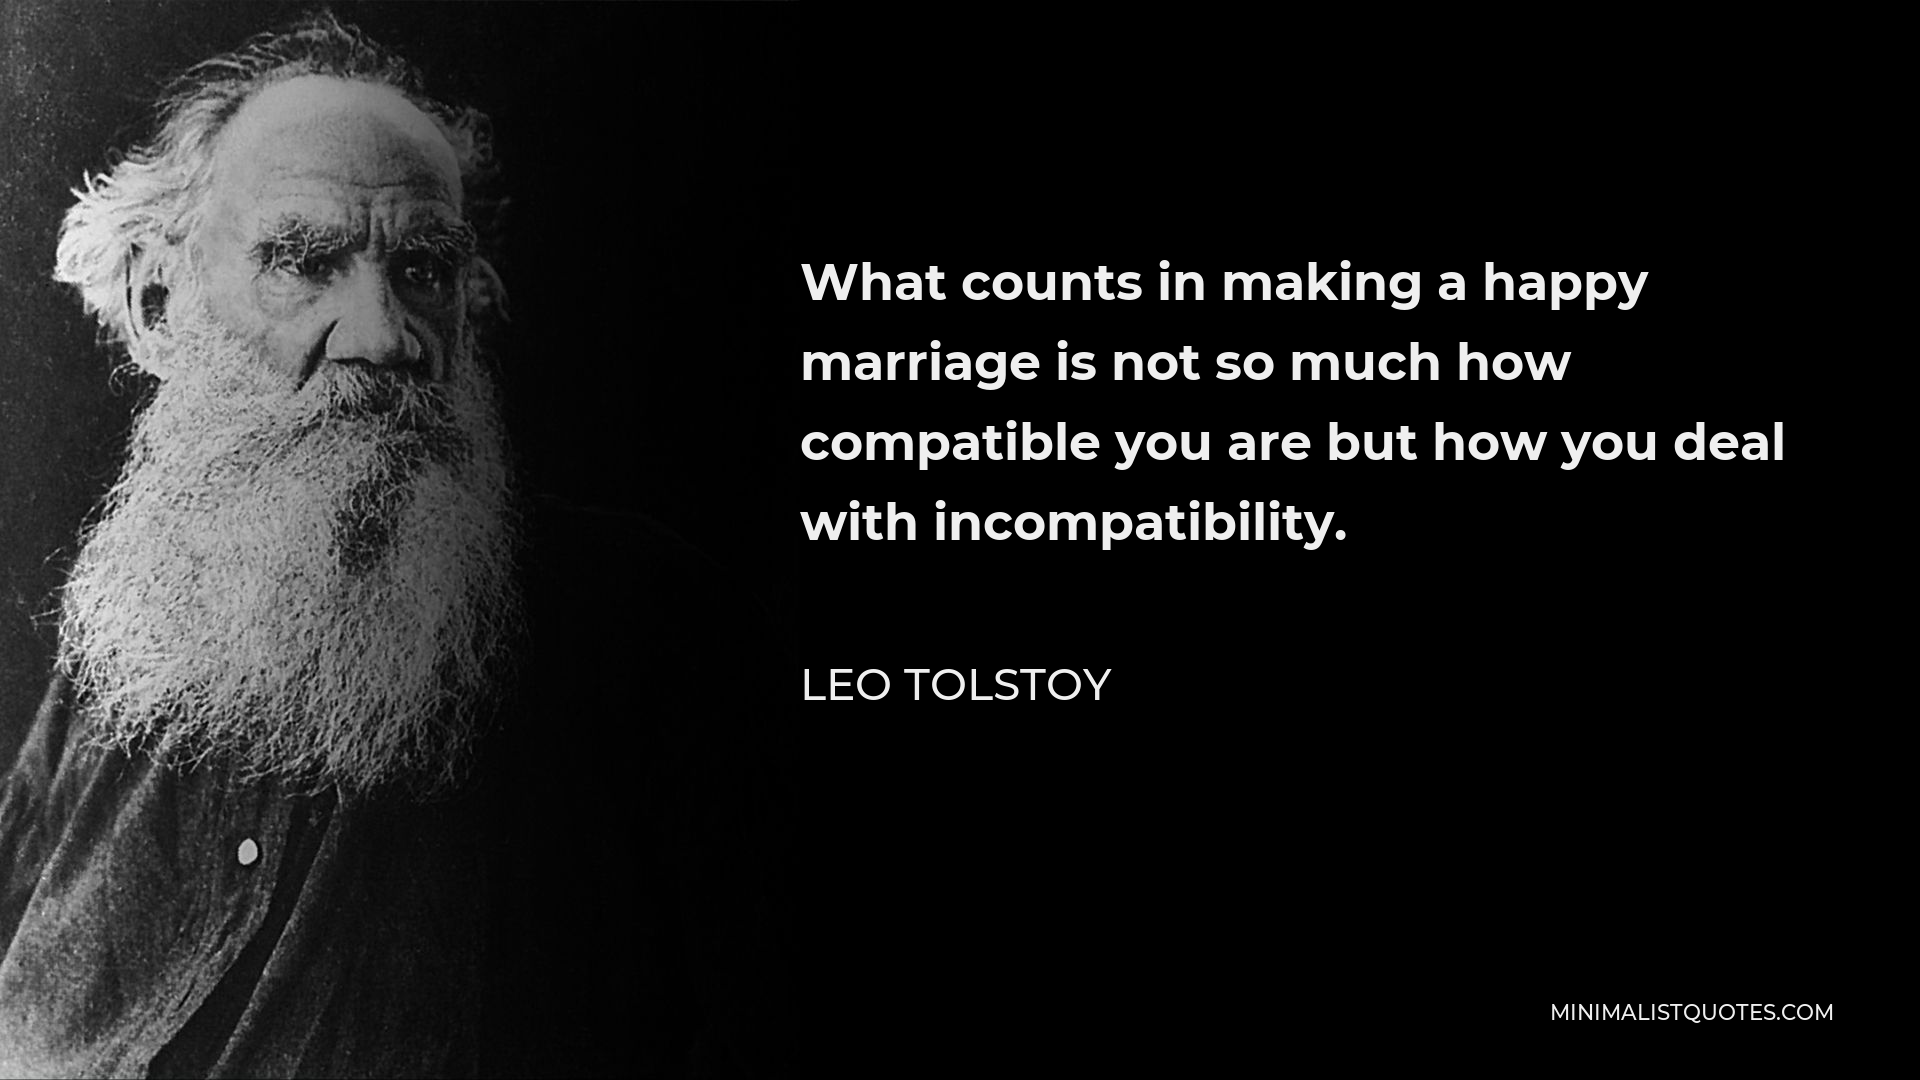 Leo Tolstoy Quote - What counts in making a happy marriage is not so much how compatible you are but how you deal with incompatibility.